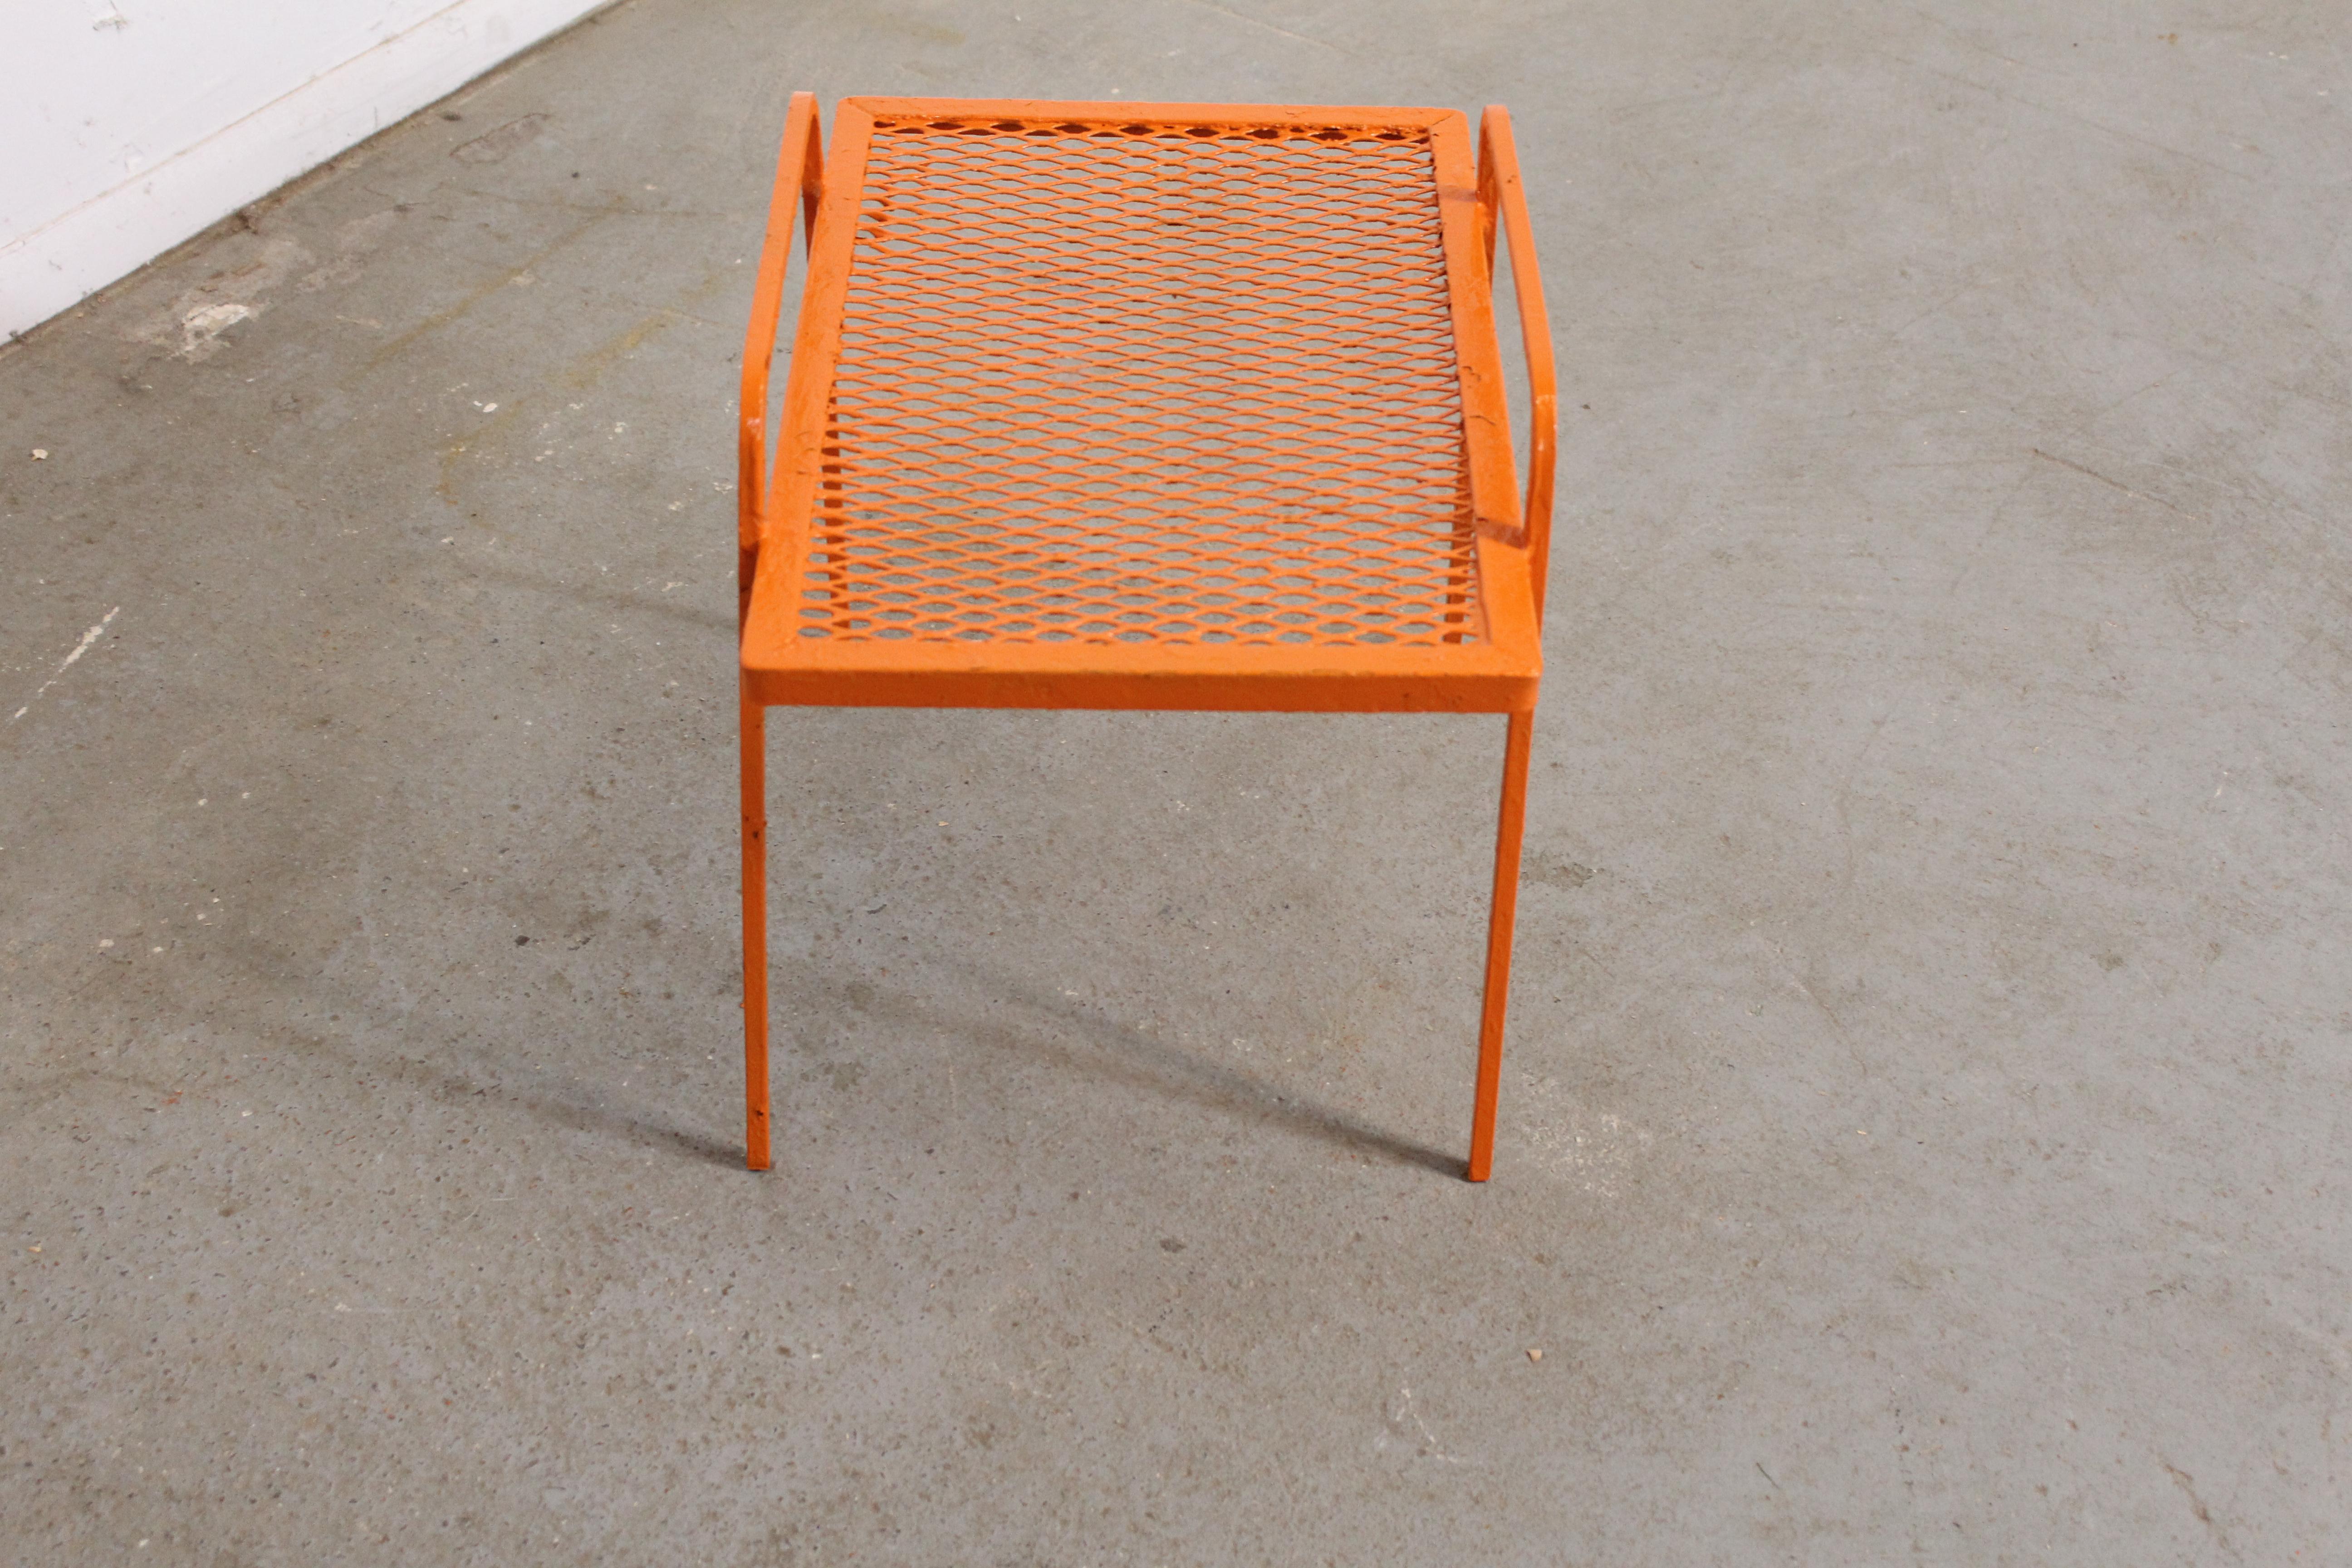 Offered is a vintage Mid-Century Modern atomic orange metal end table, circa 1960's. This piece is made of welded steel and features gracefully styled legs and a mesh top. It is in good condition considering its age with minor age wear (surface